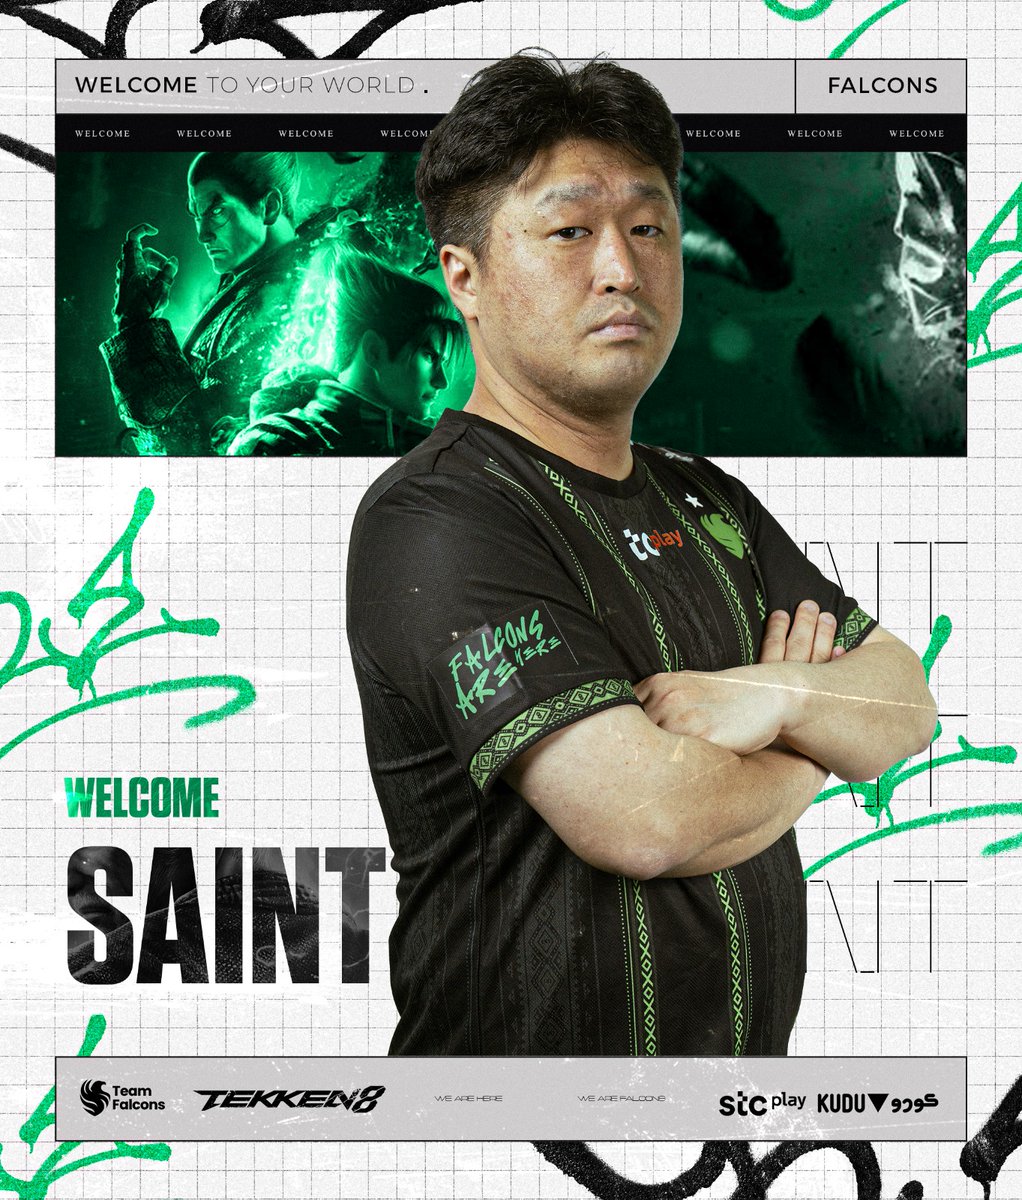 A true legend of the game joins our Tekken roster. 🐐 Welcome @TK_SAINT! 🦅 #FalconsAreHere